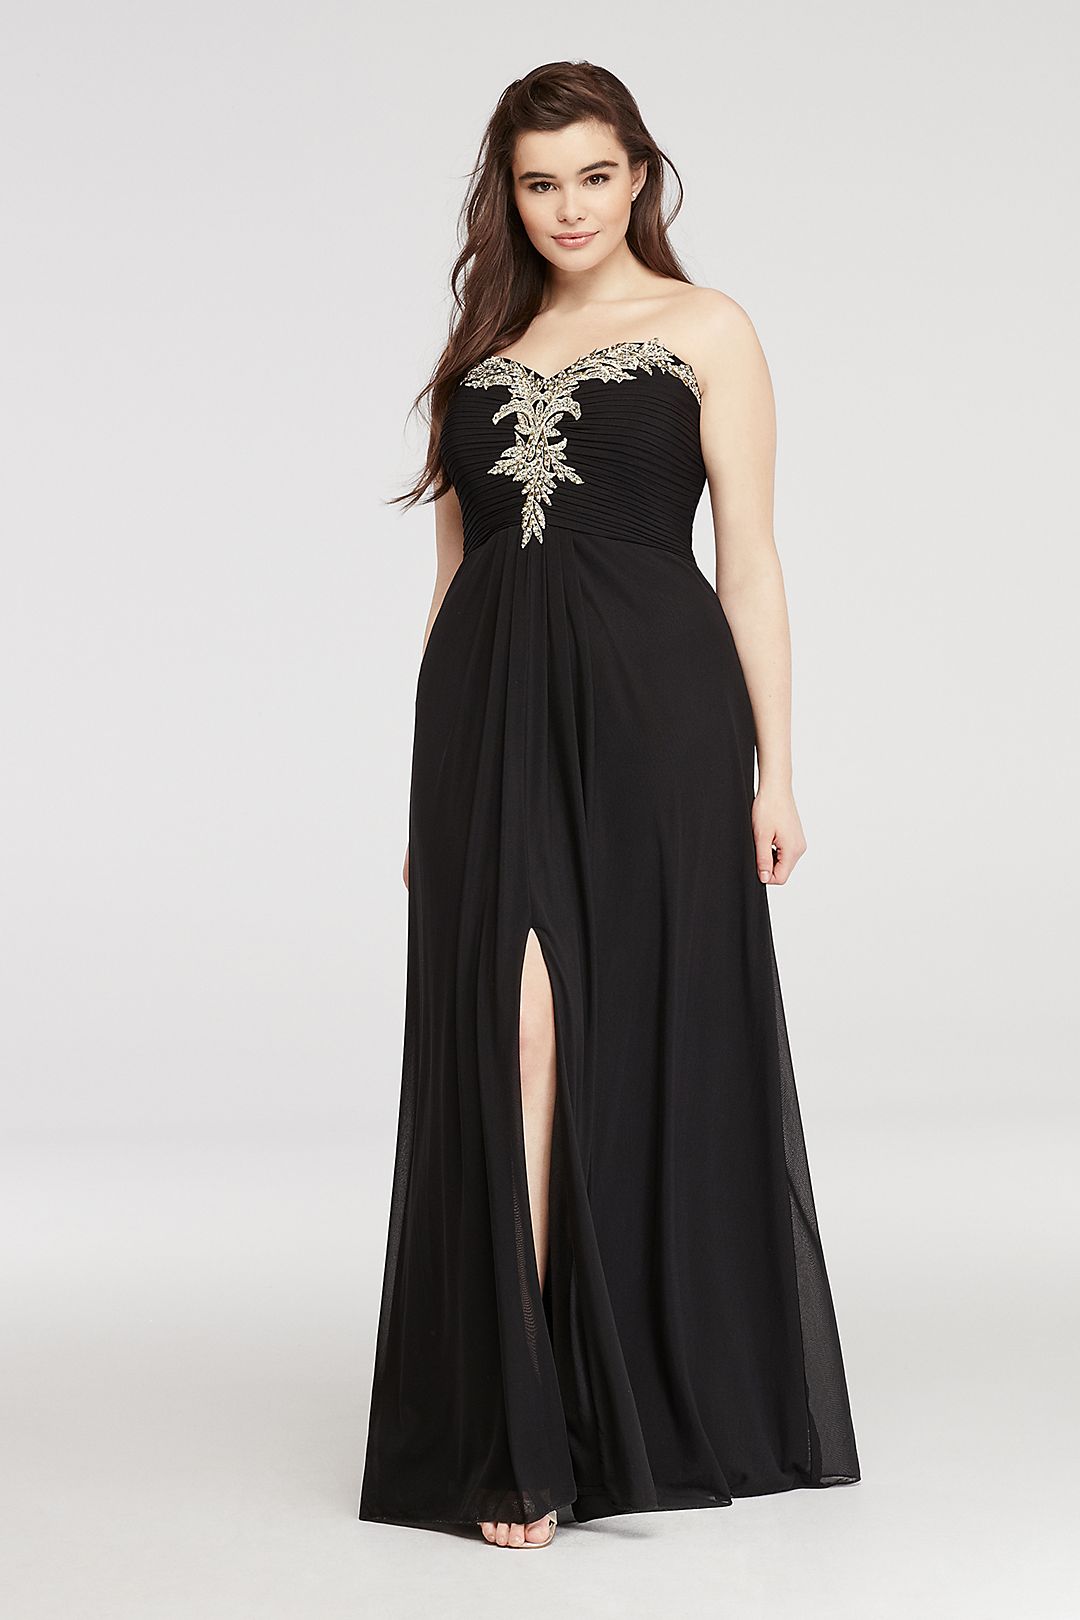 Strapless Prom Dress with Embroidered Neckline Image 1